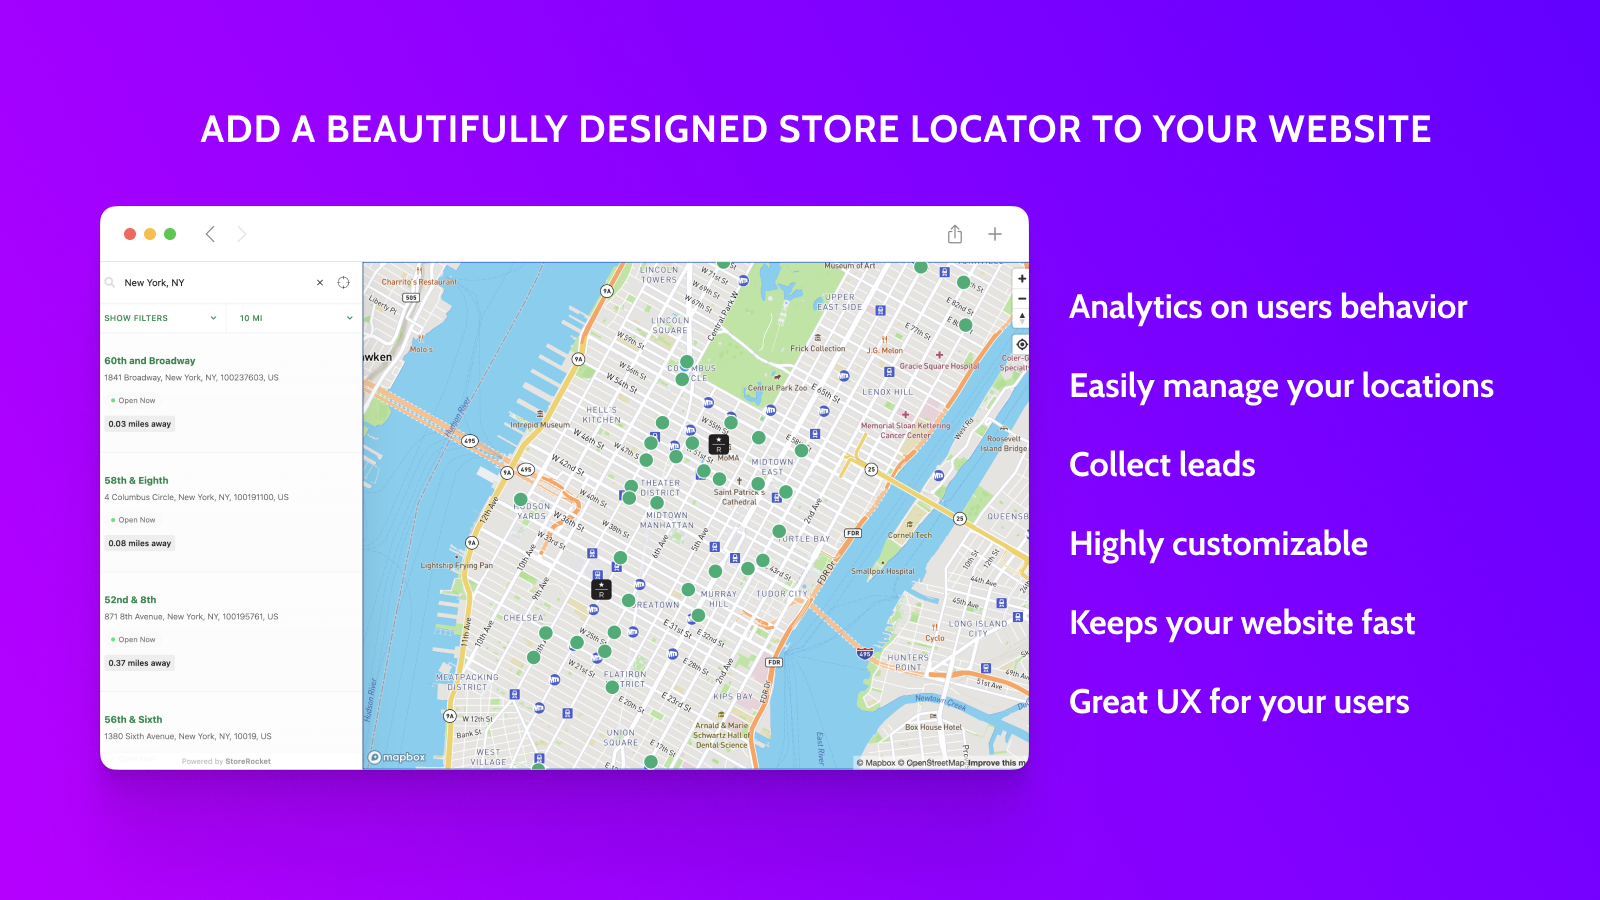 Add a beautifully designed store locator to your website!